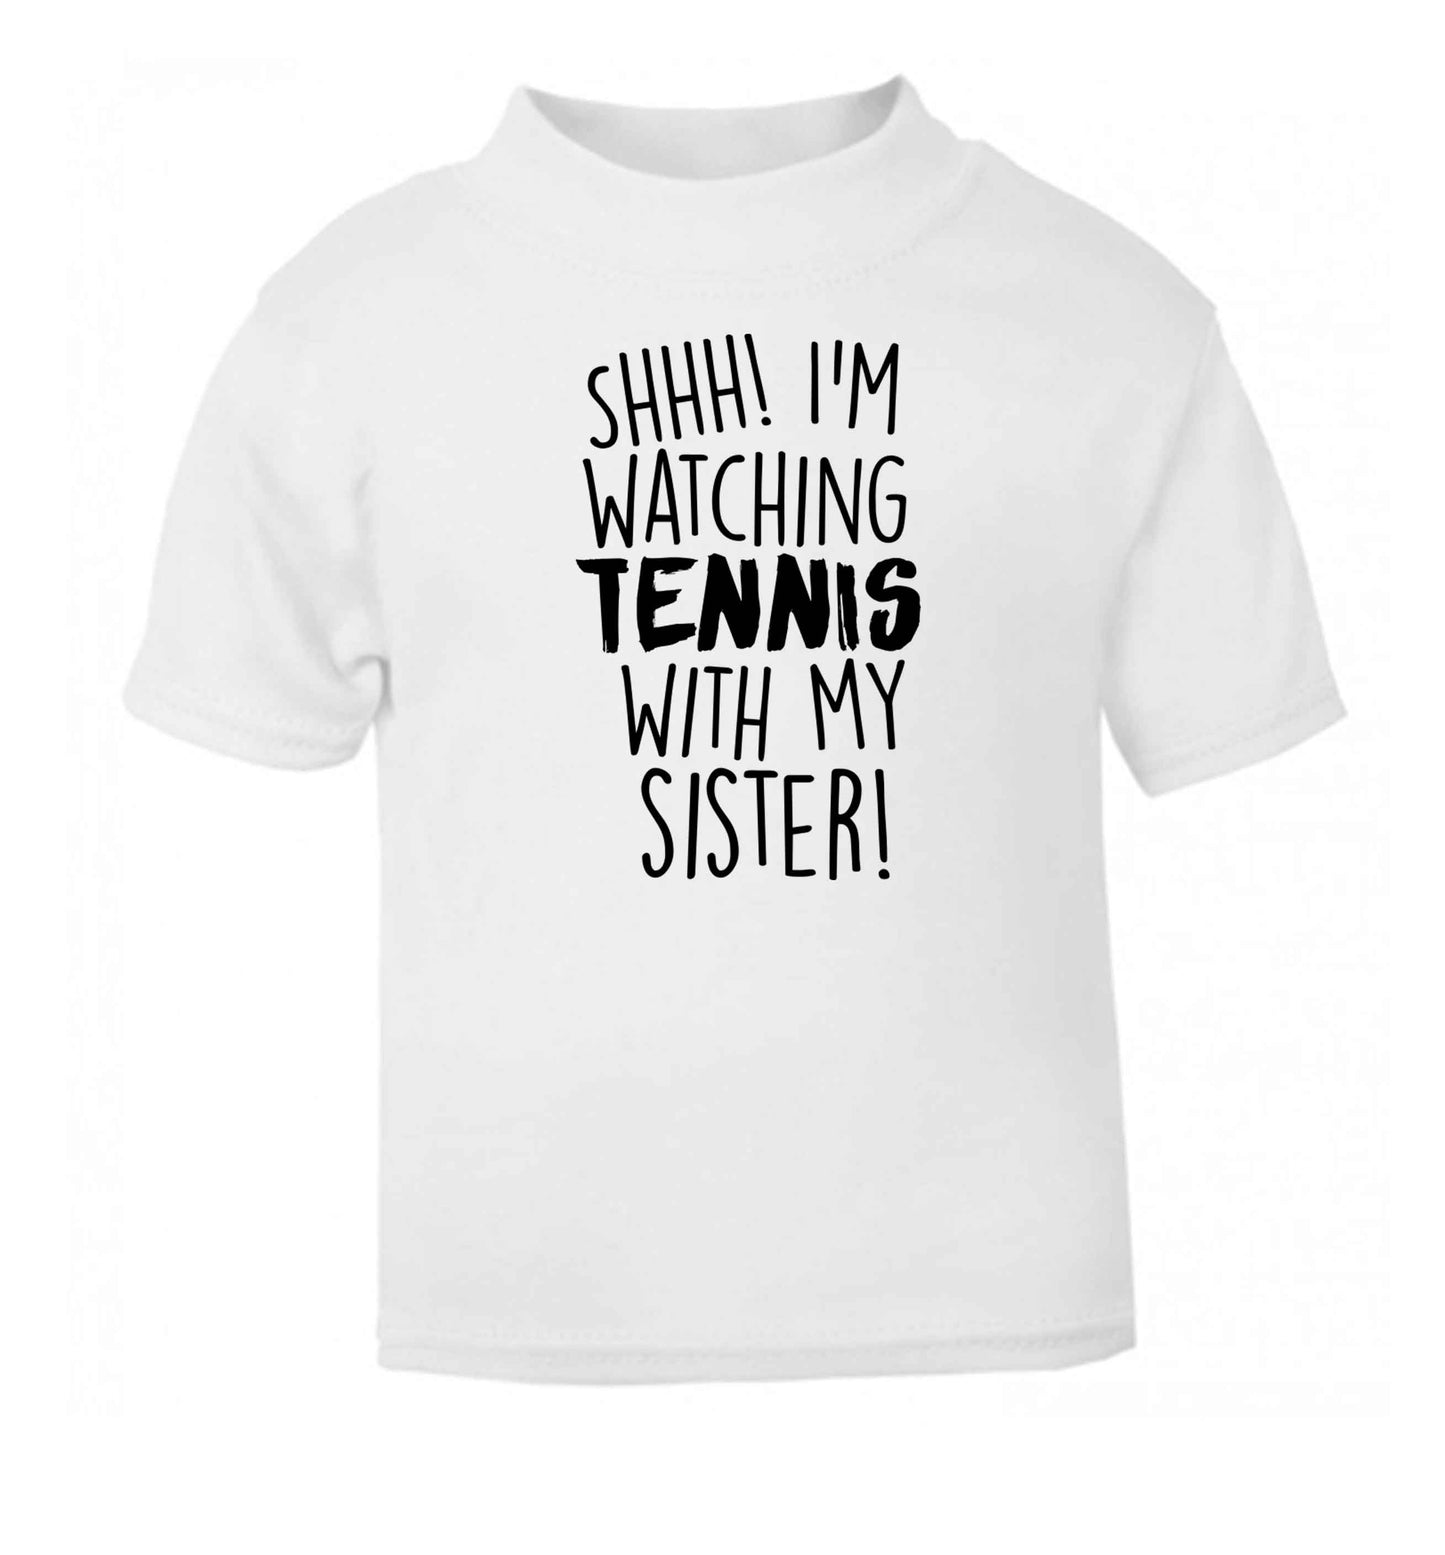 Shh! I'm watching tennis with my sister! white Baby Toddler Tshirt 2 Years